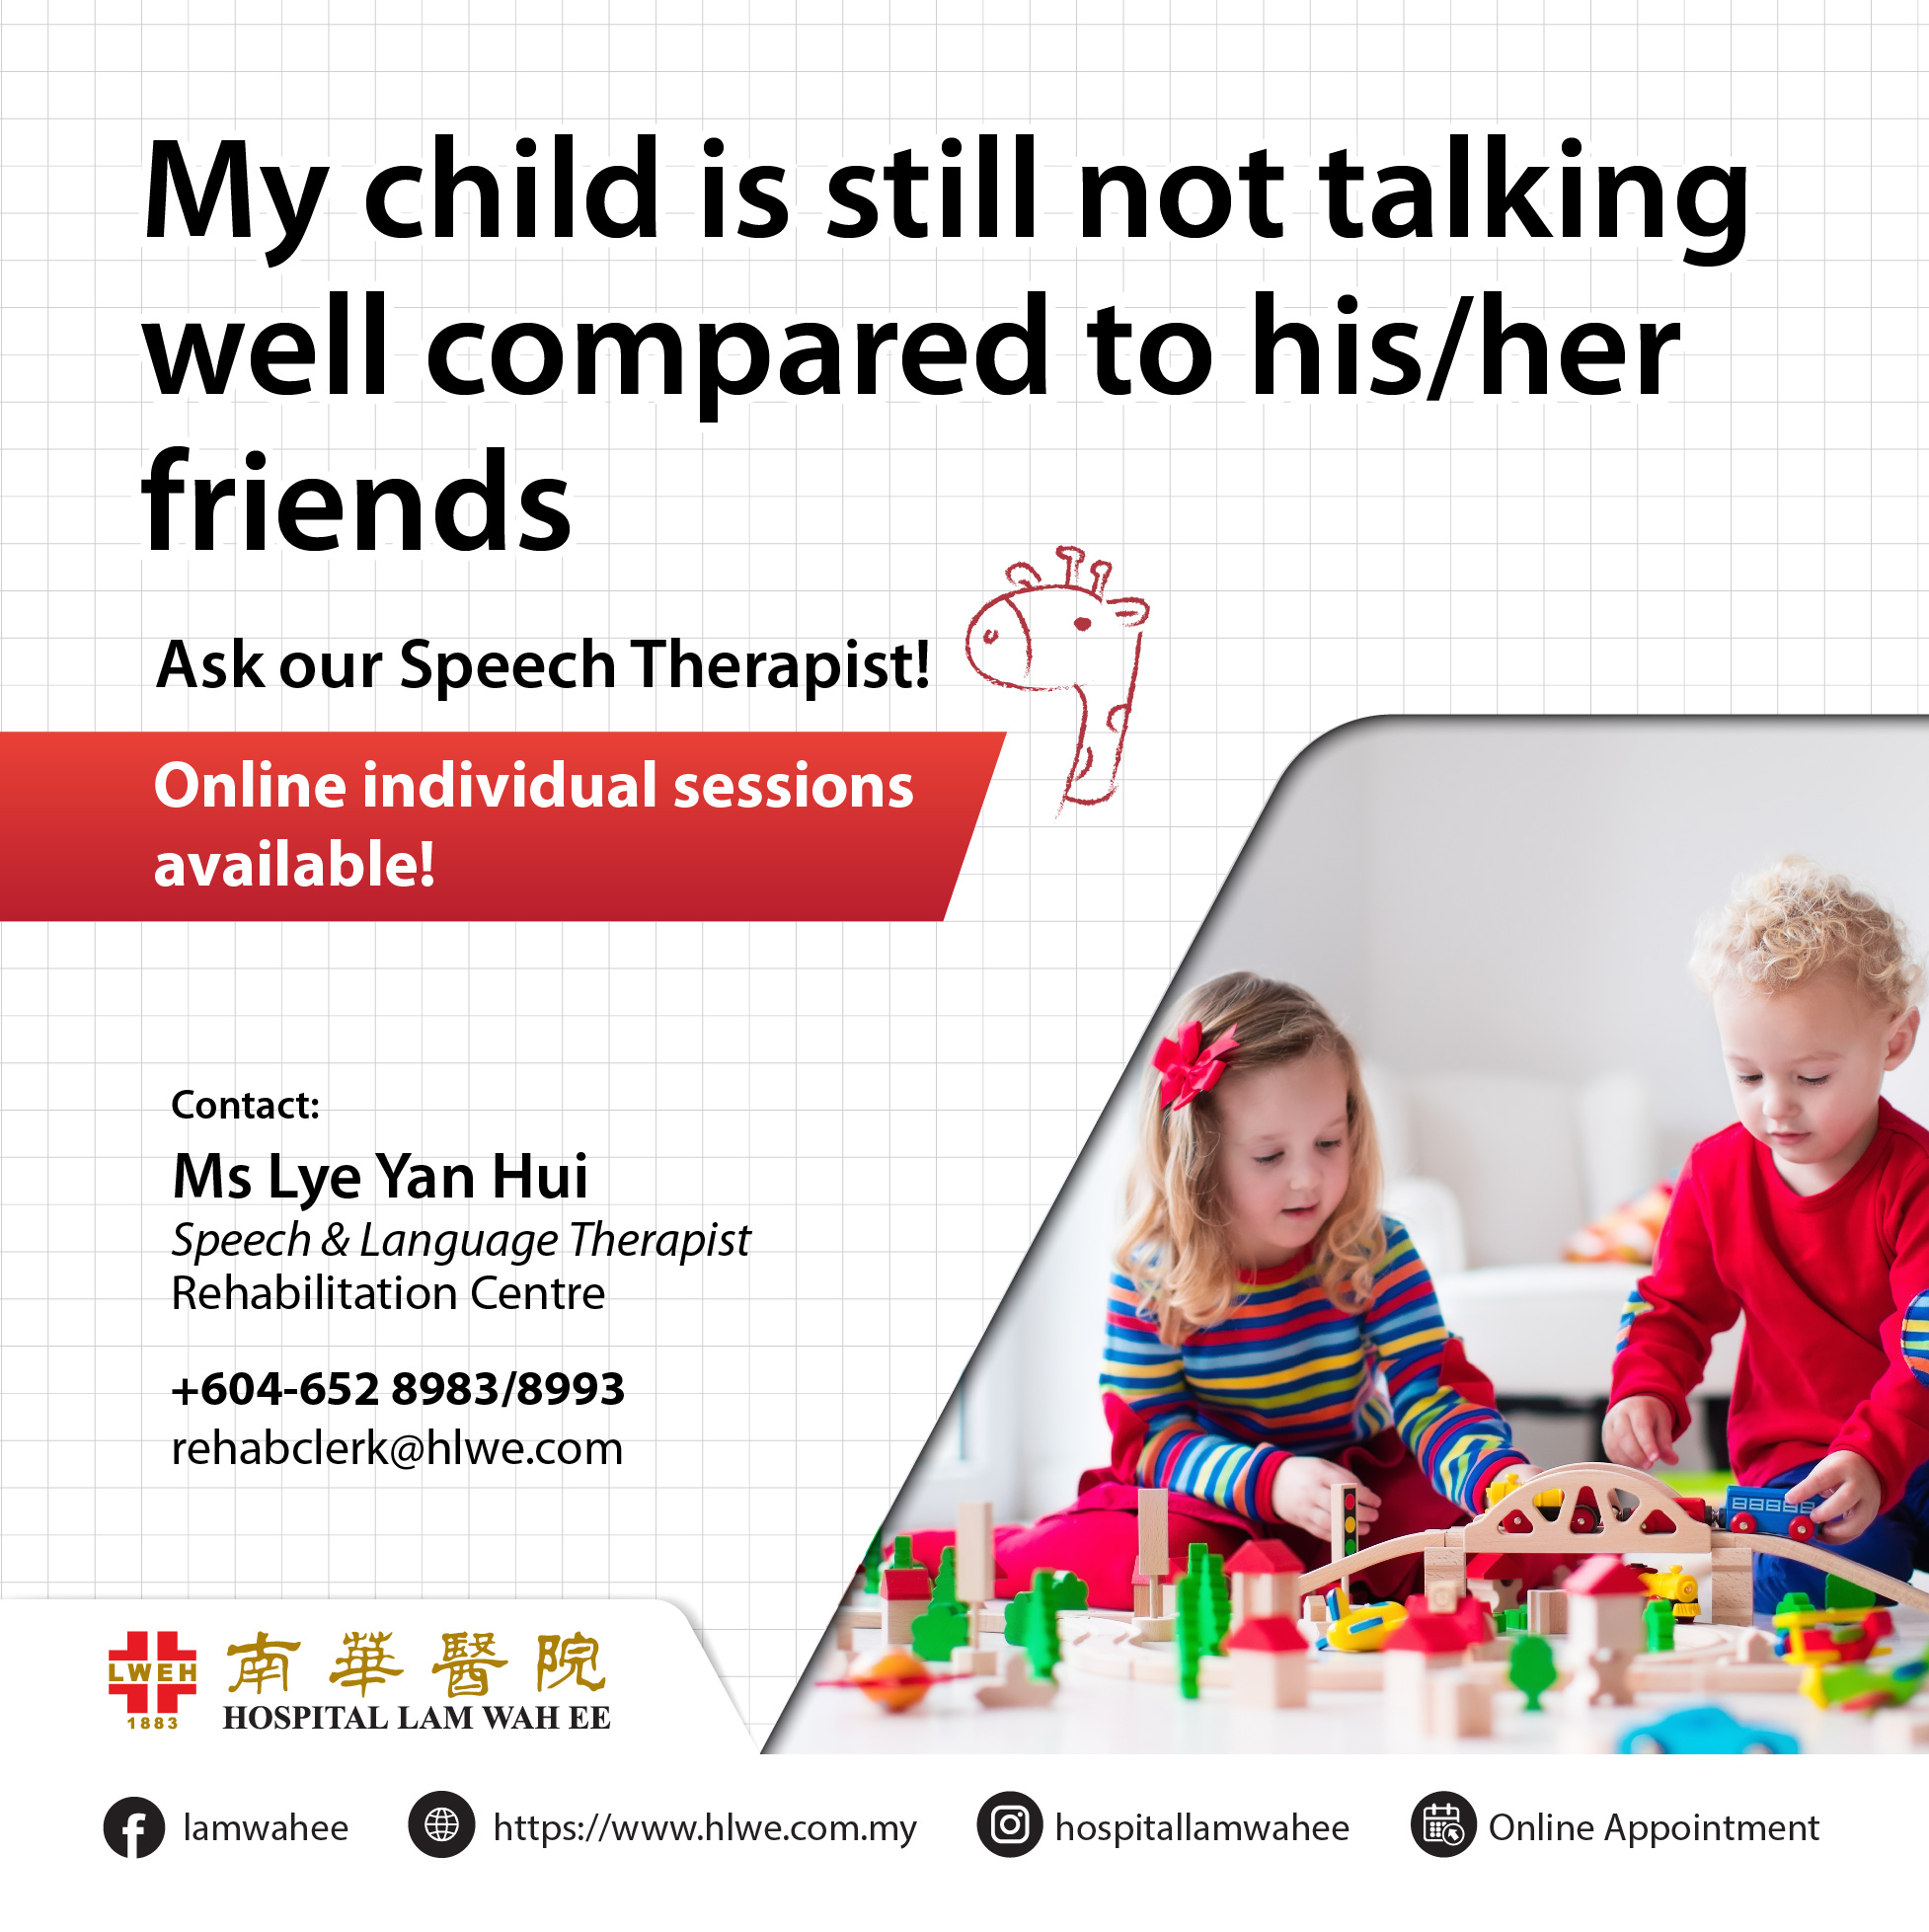 My child is still not talking well compared to his/her friends